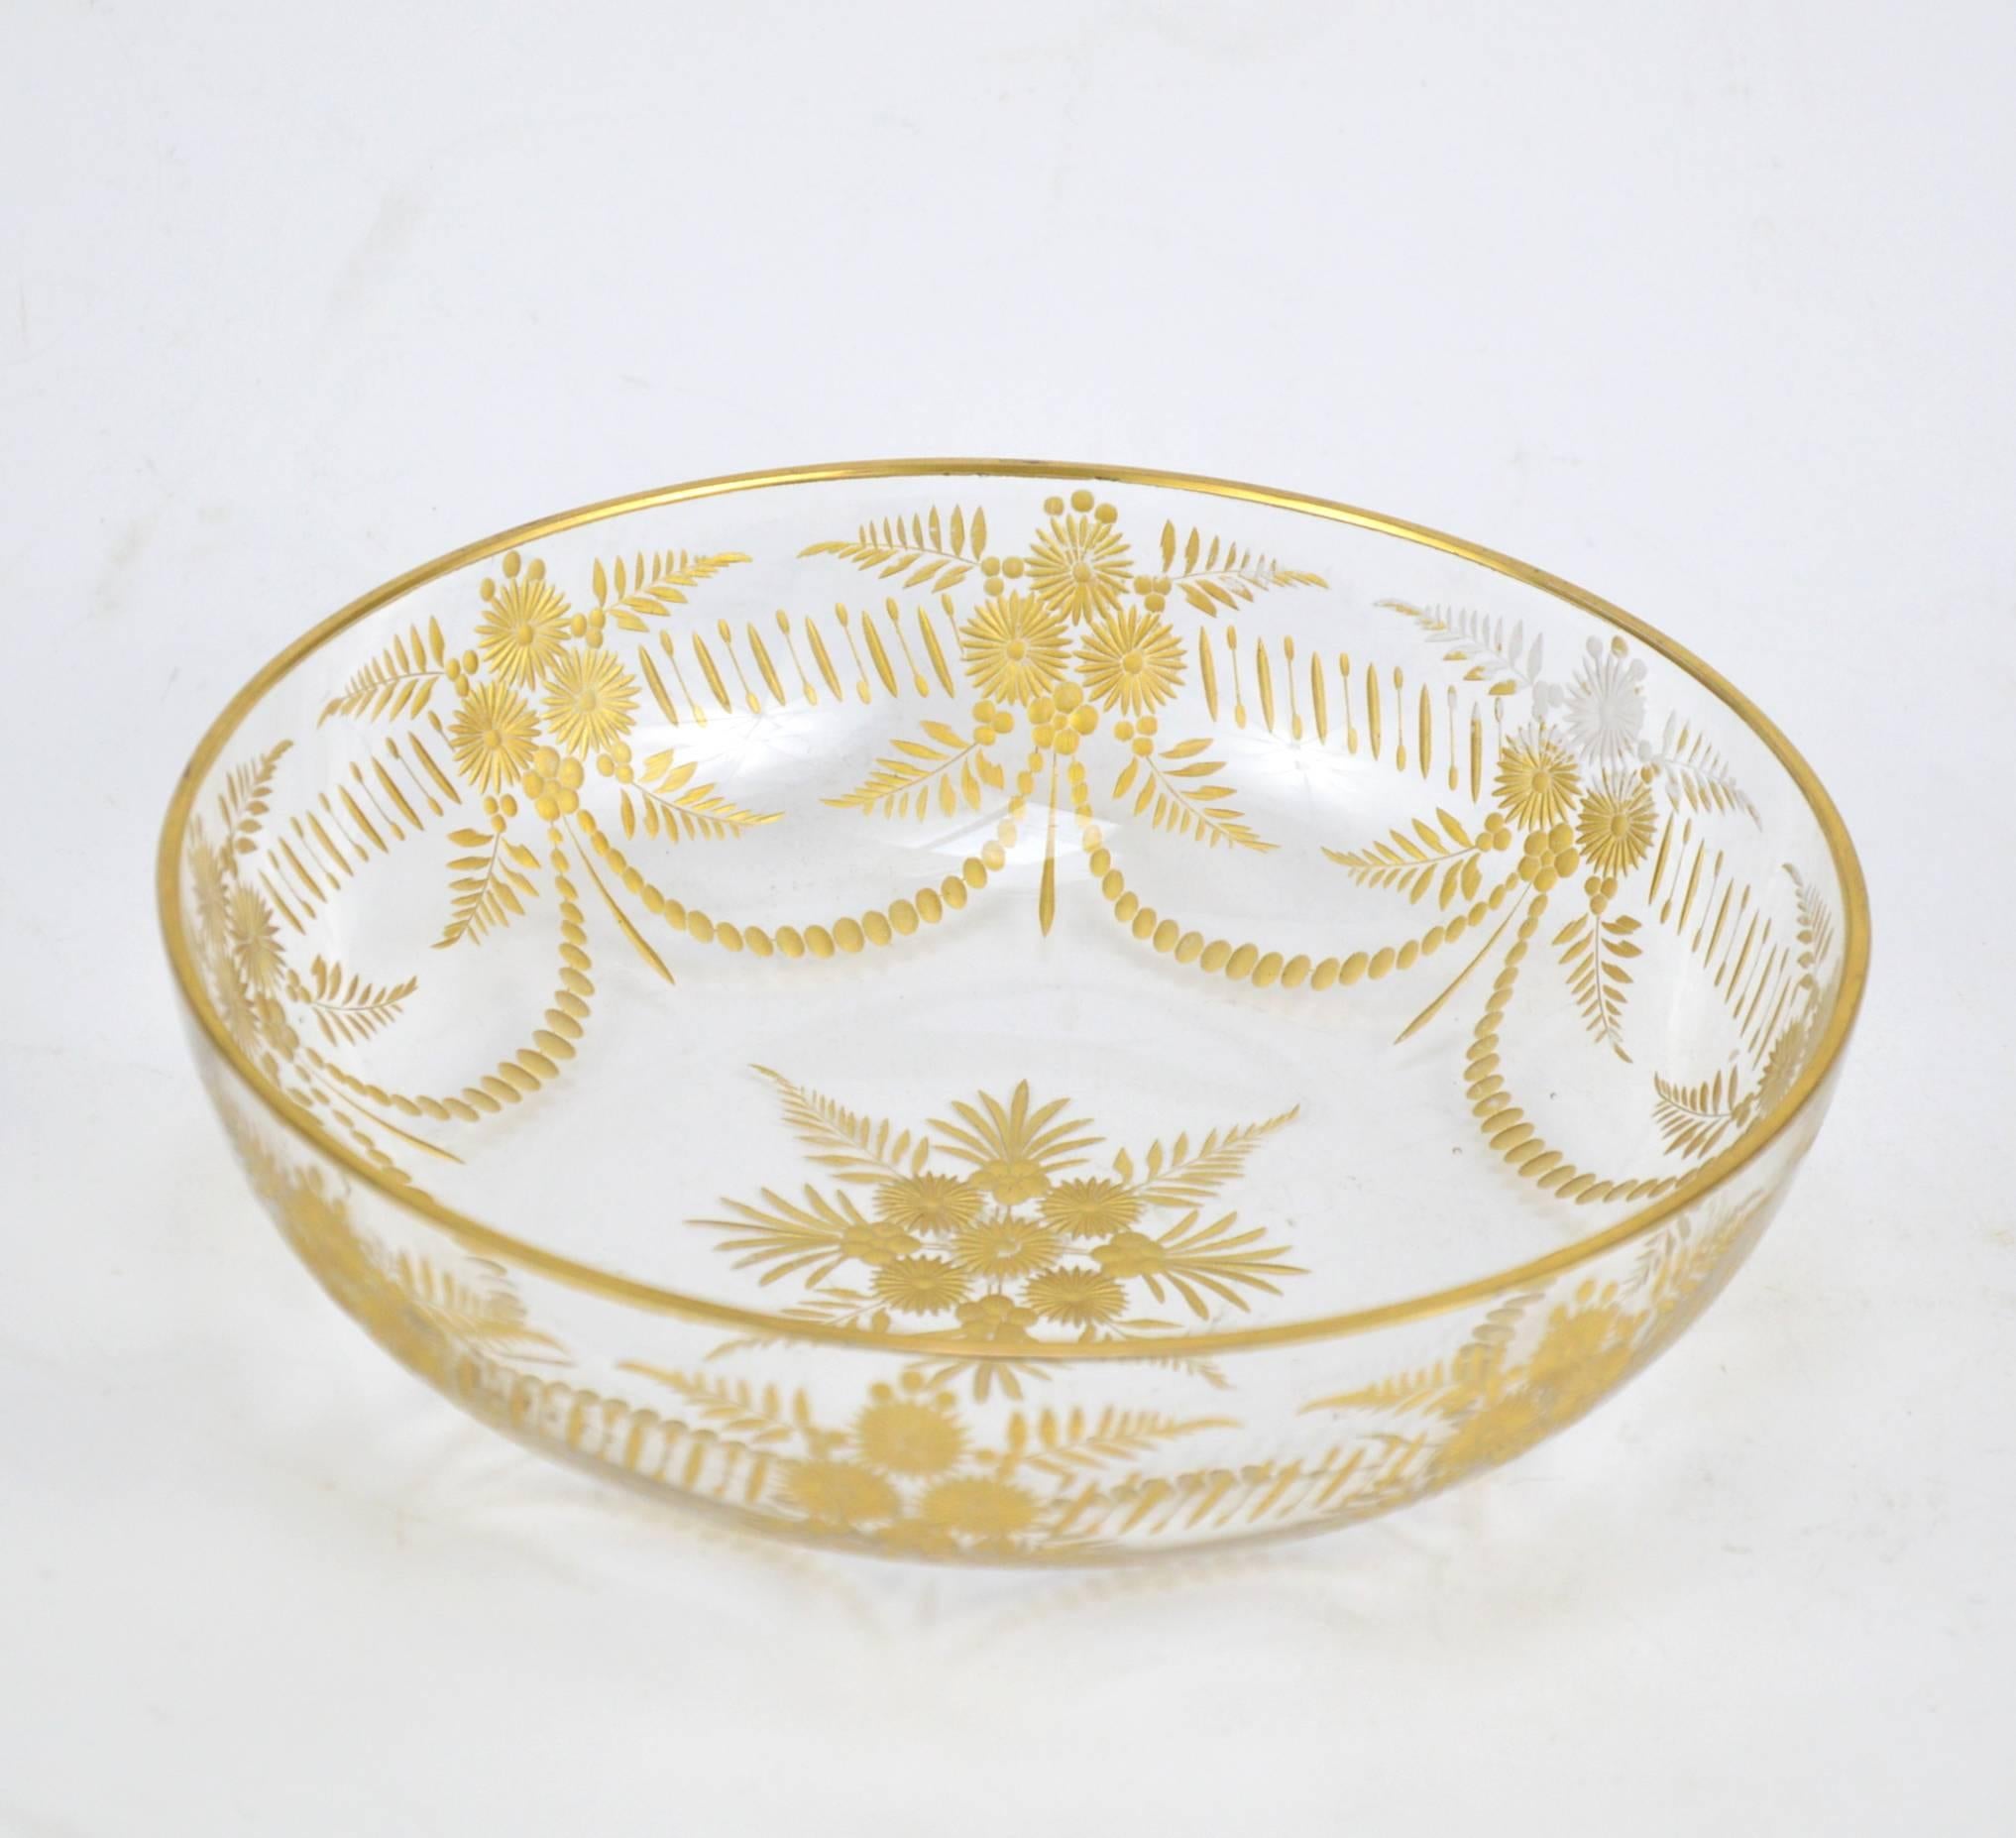 Gilt hand-cut glass bowl with floral decoration. France, 19th century. Fine quality.